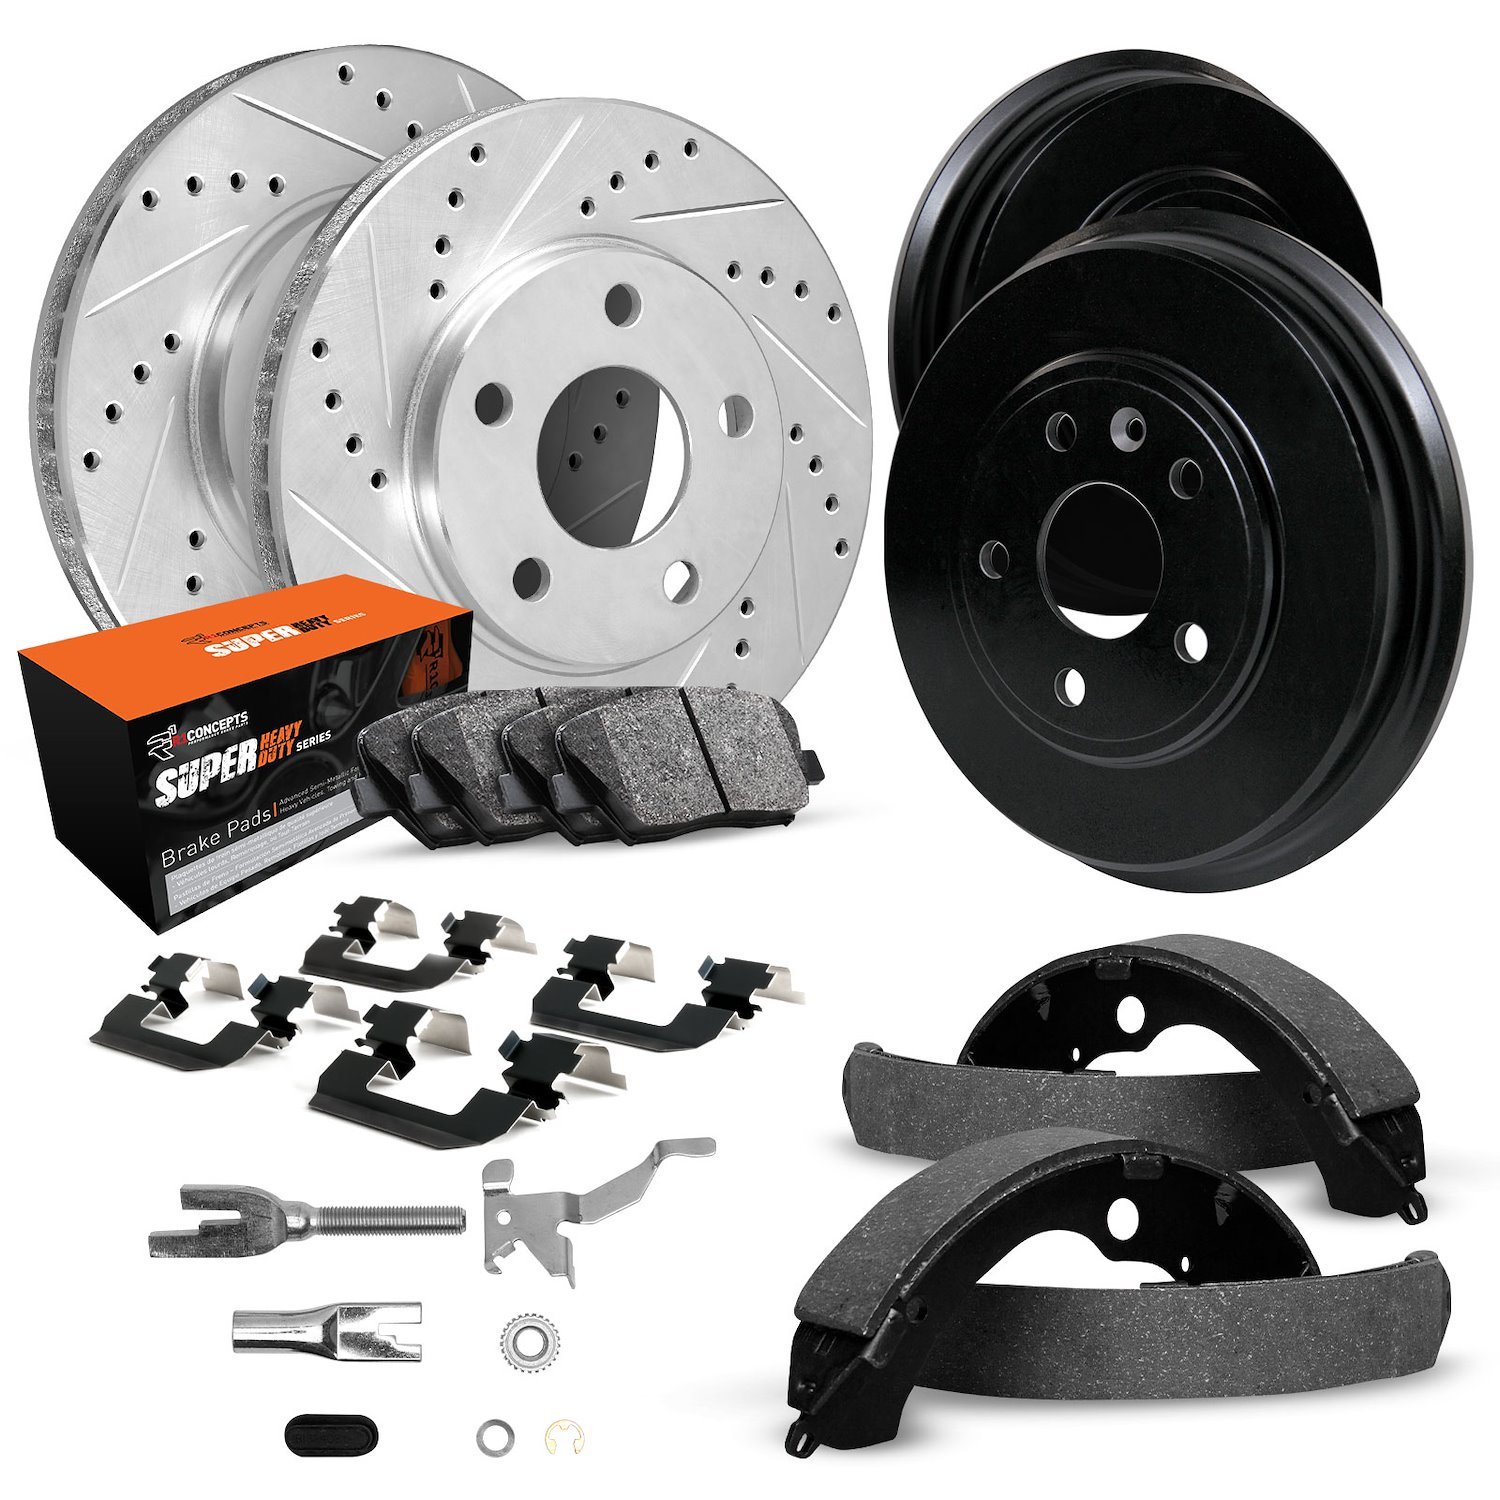 E-Line Drilled/Slotted Silver Rotor & Drum Set w/Super-Duty Pads, Shoes/Hardware/Adjusters, 1986-1990 Ford/Lincoln/Mercury/Mazda